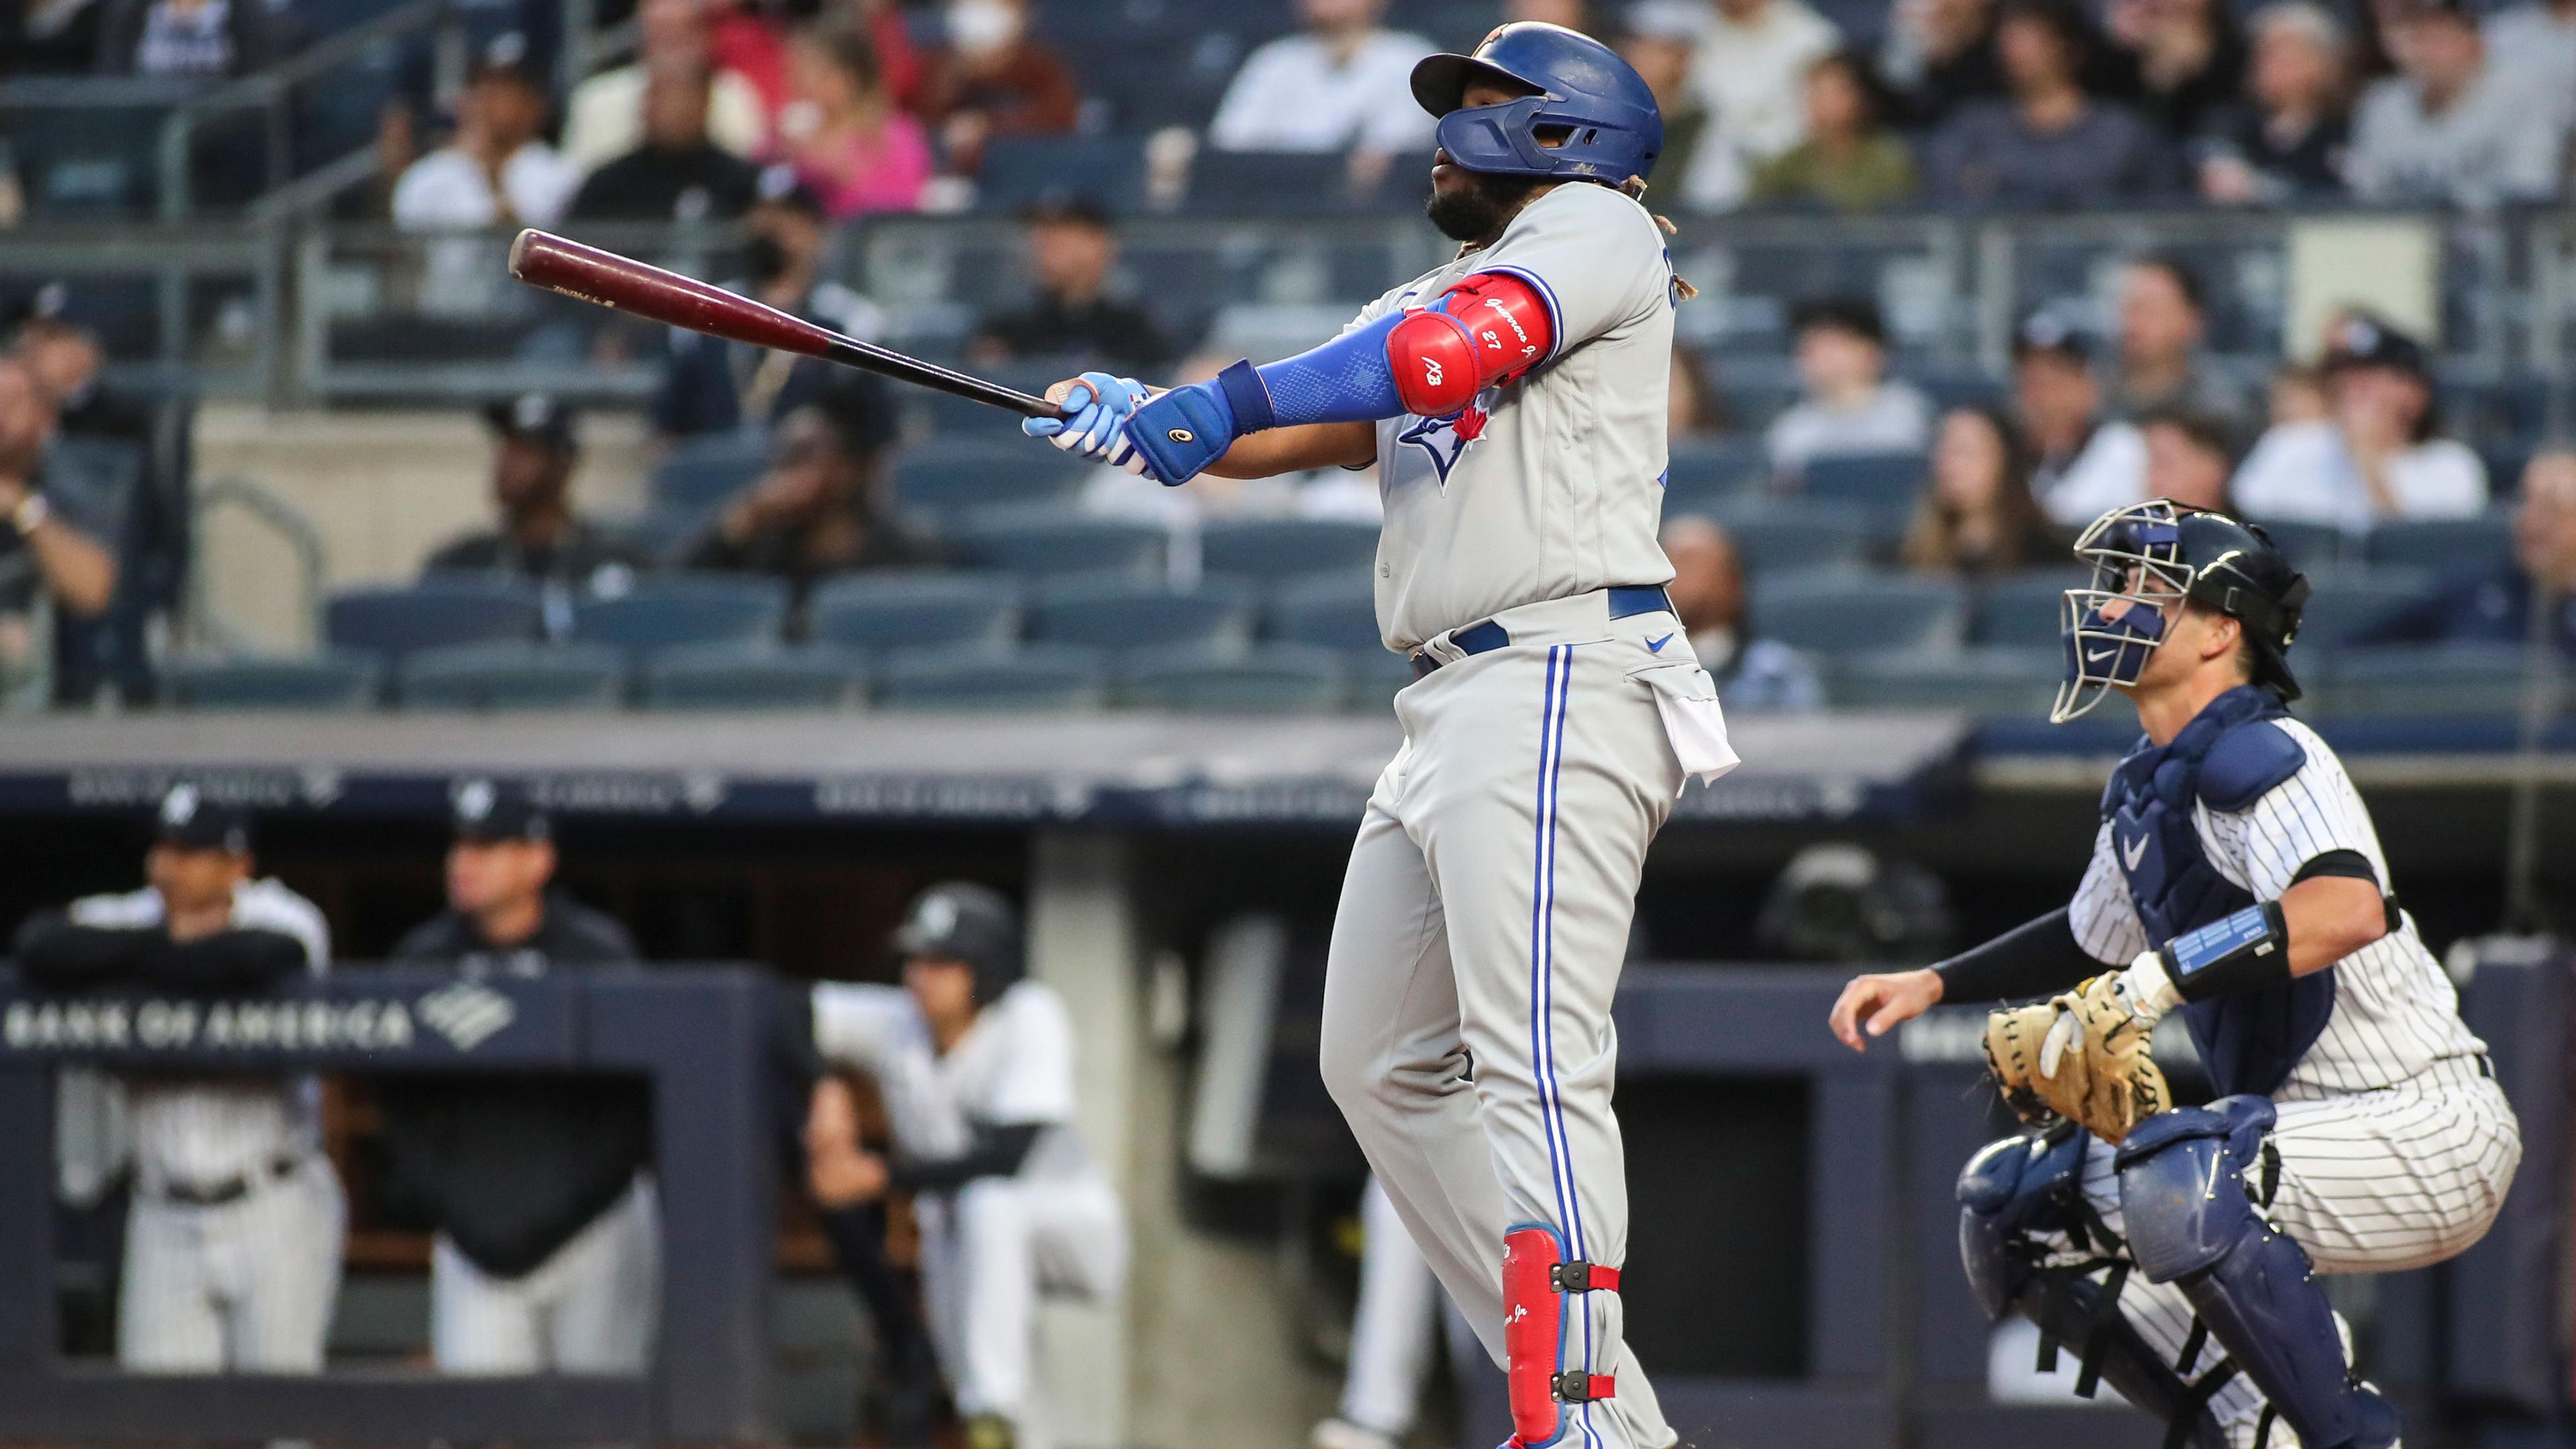 Apr 13, 2022; Bronx, New York, USA; Toronto Blue Jays first baseman Vladimir Guerrero Jr. (27) hits a solo home run in the first inning against the New York Yankees at Yankee Stadium. / Wendell Cruz-USA TODAY Sports